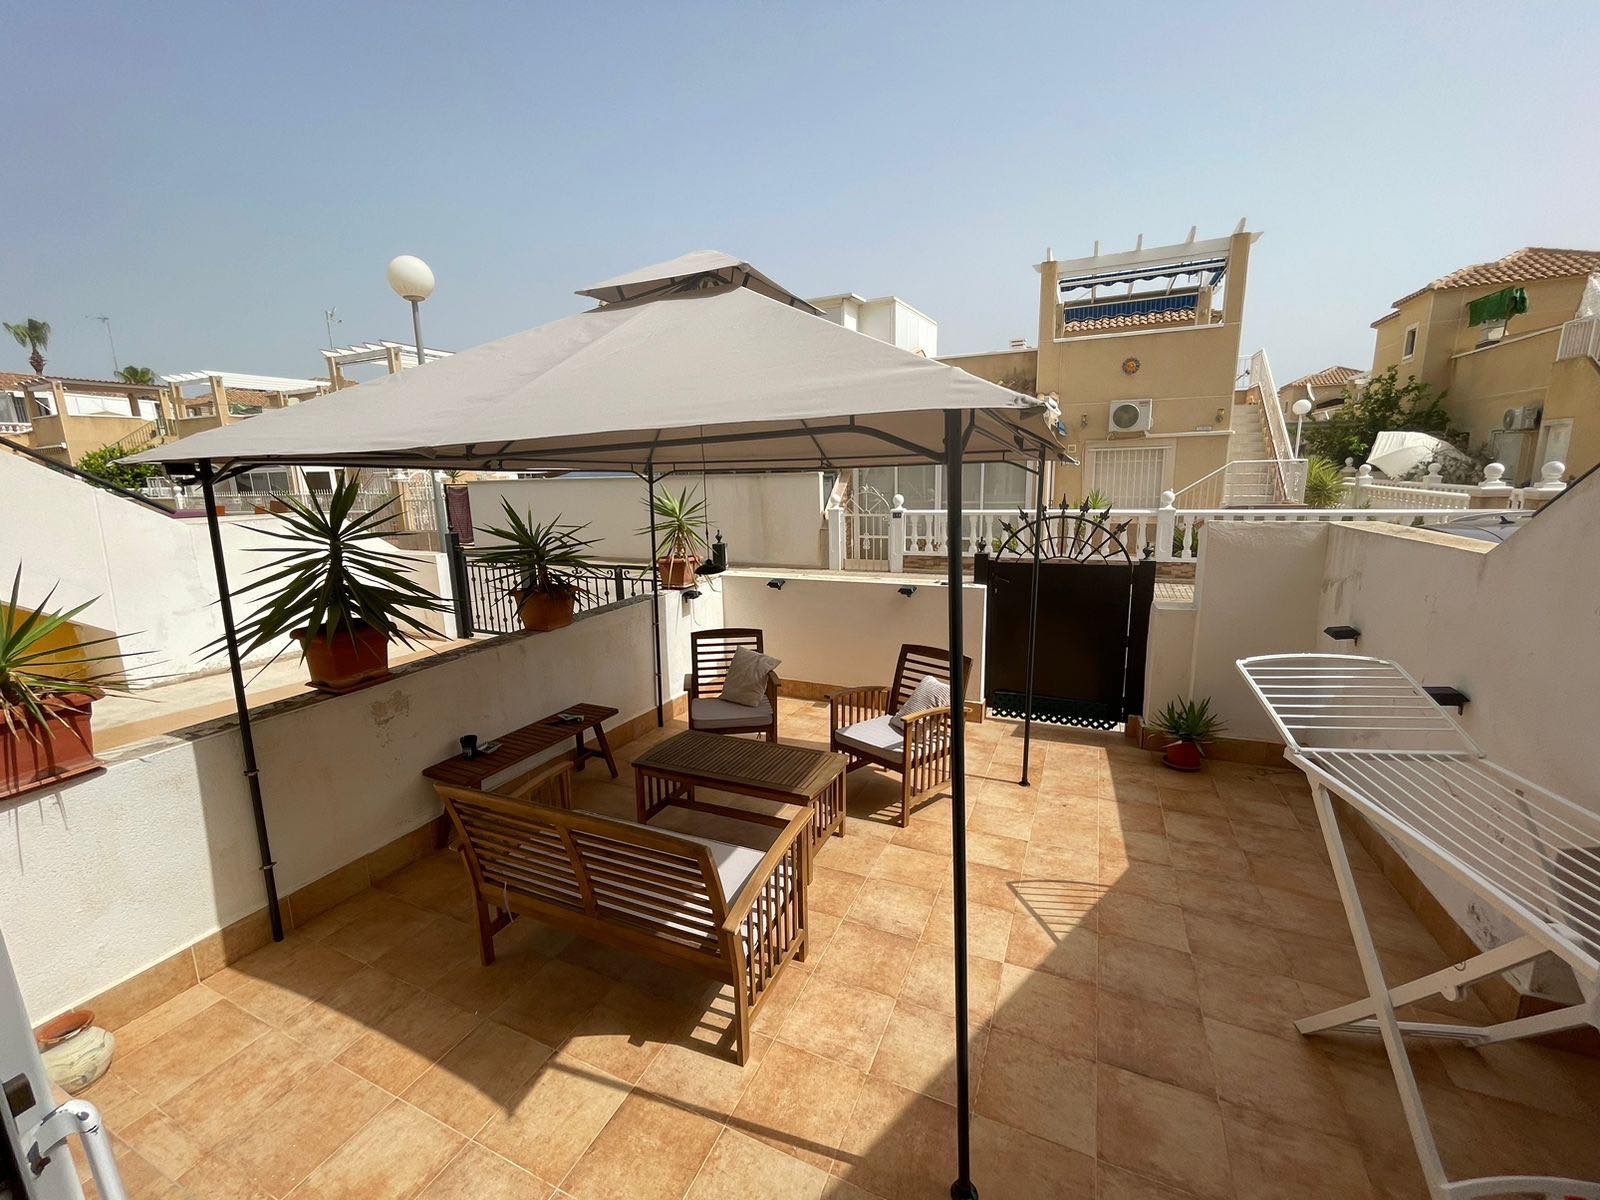 For sale: 2 bedroom apartment / flat in Dream Hills